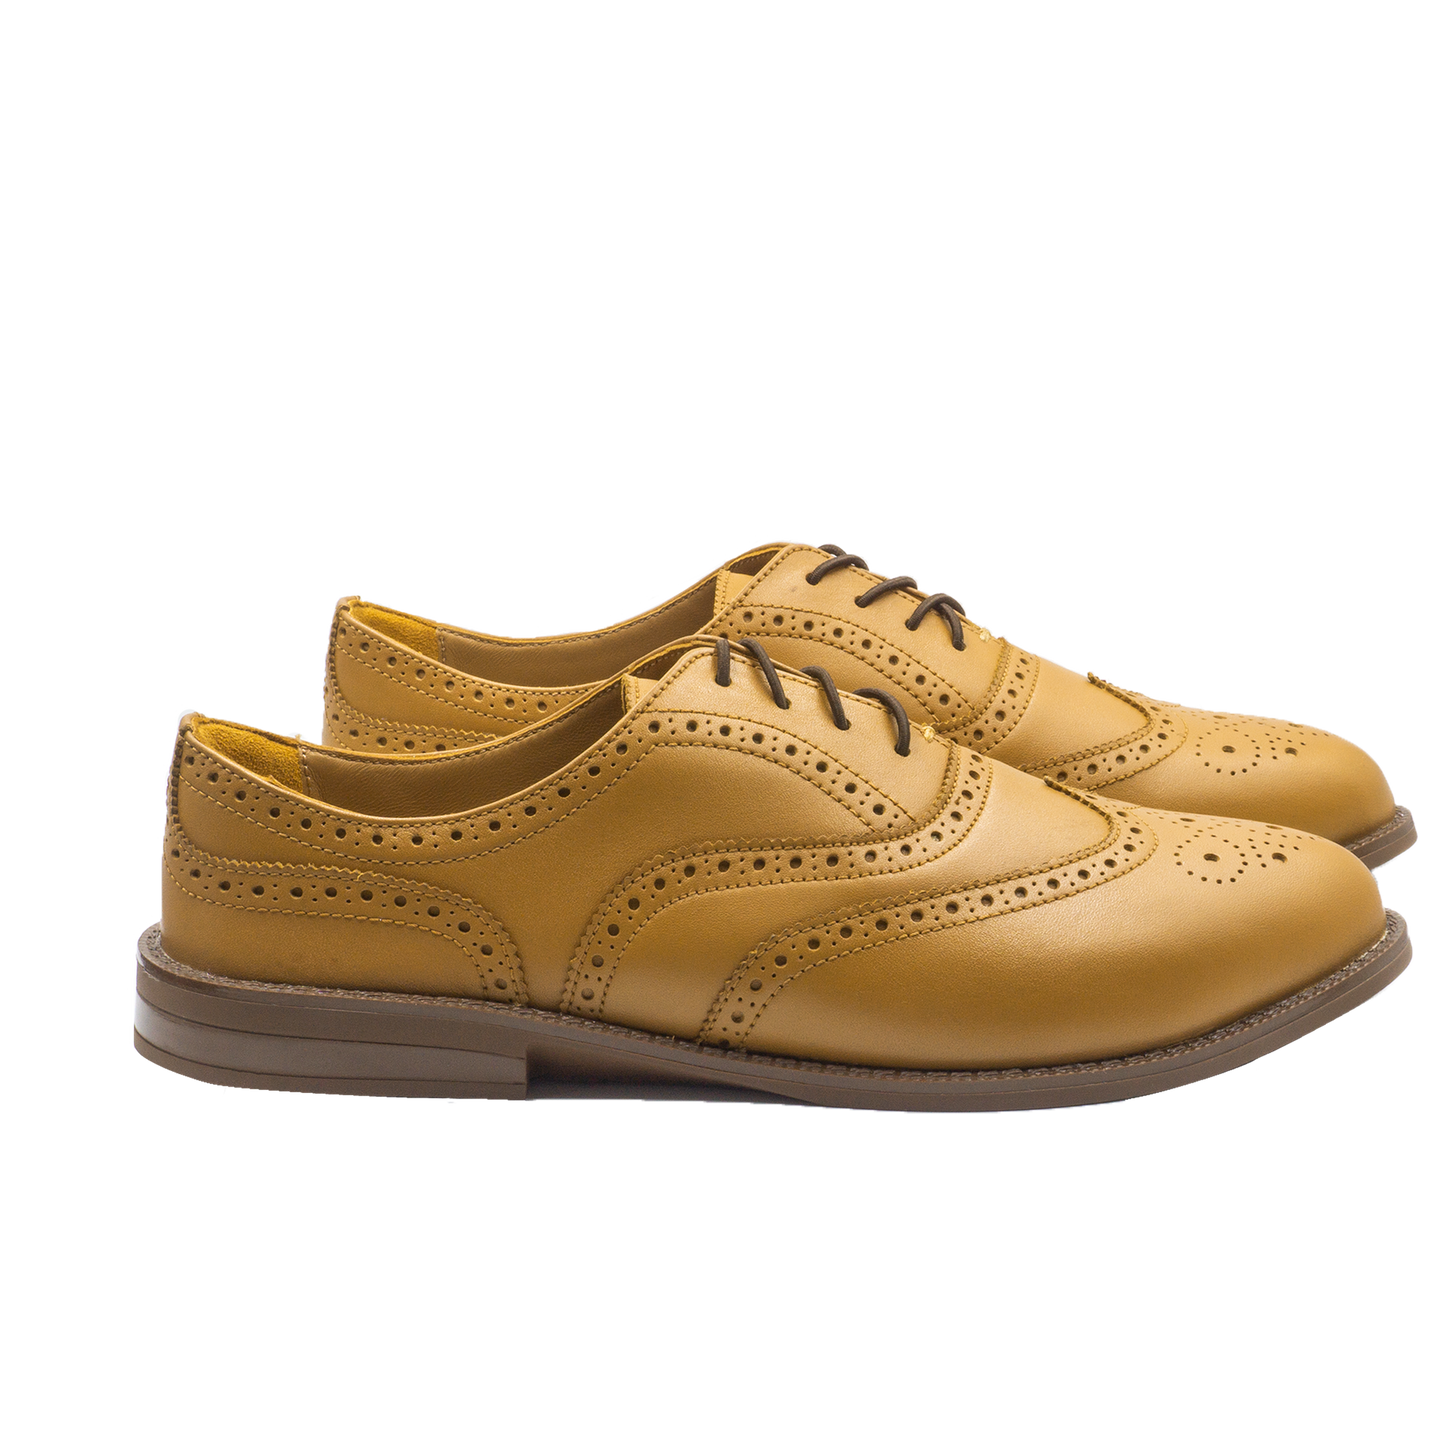 VICTORIA Wingtip Oxfords, Brown Colors (Outlet)